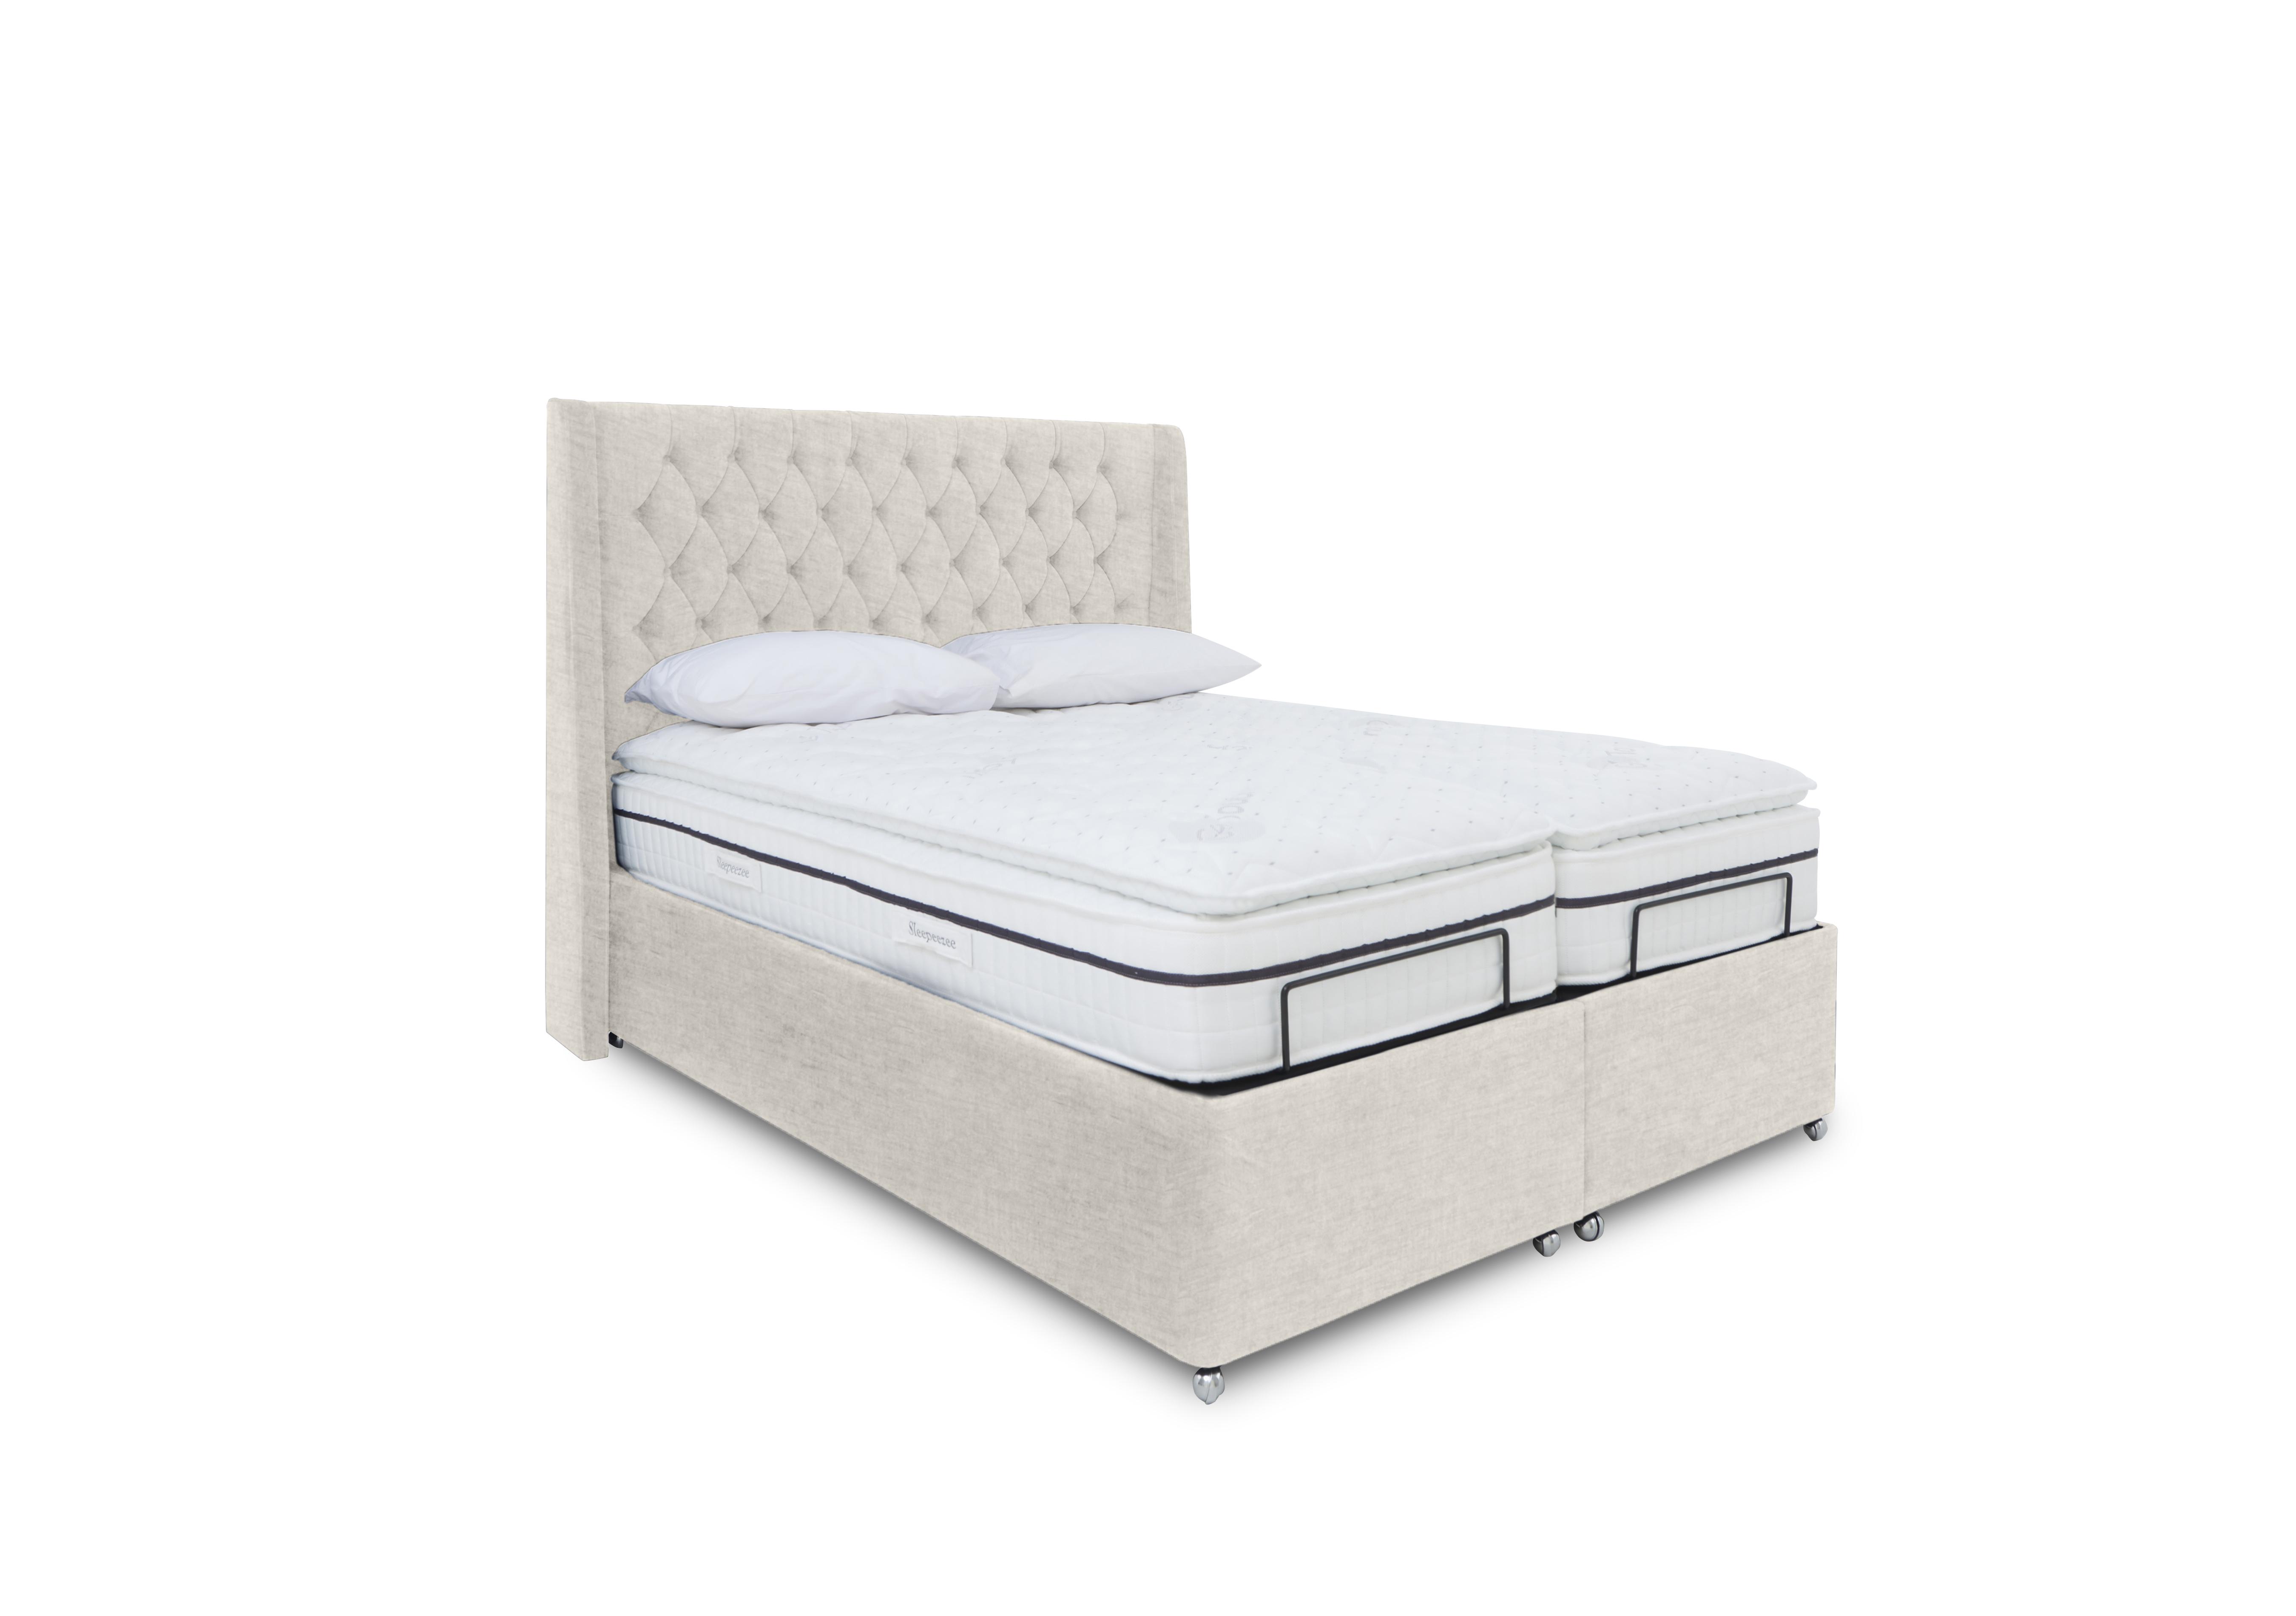 E-Motion Zen Dual Adjustable Ottoman Divan Base with Massage Function and Headboard in 901 Sandstone Pearl on Furniture Village